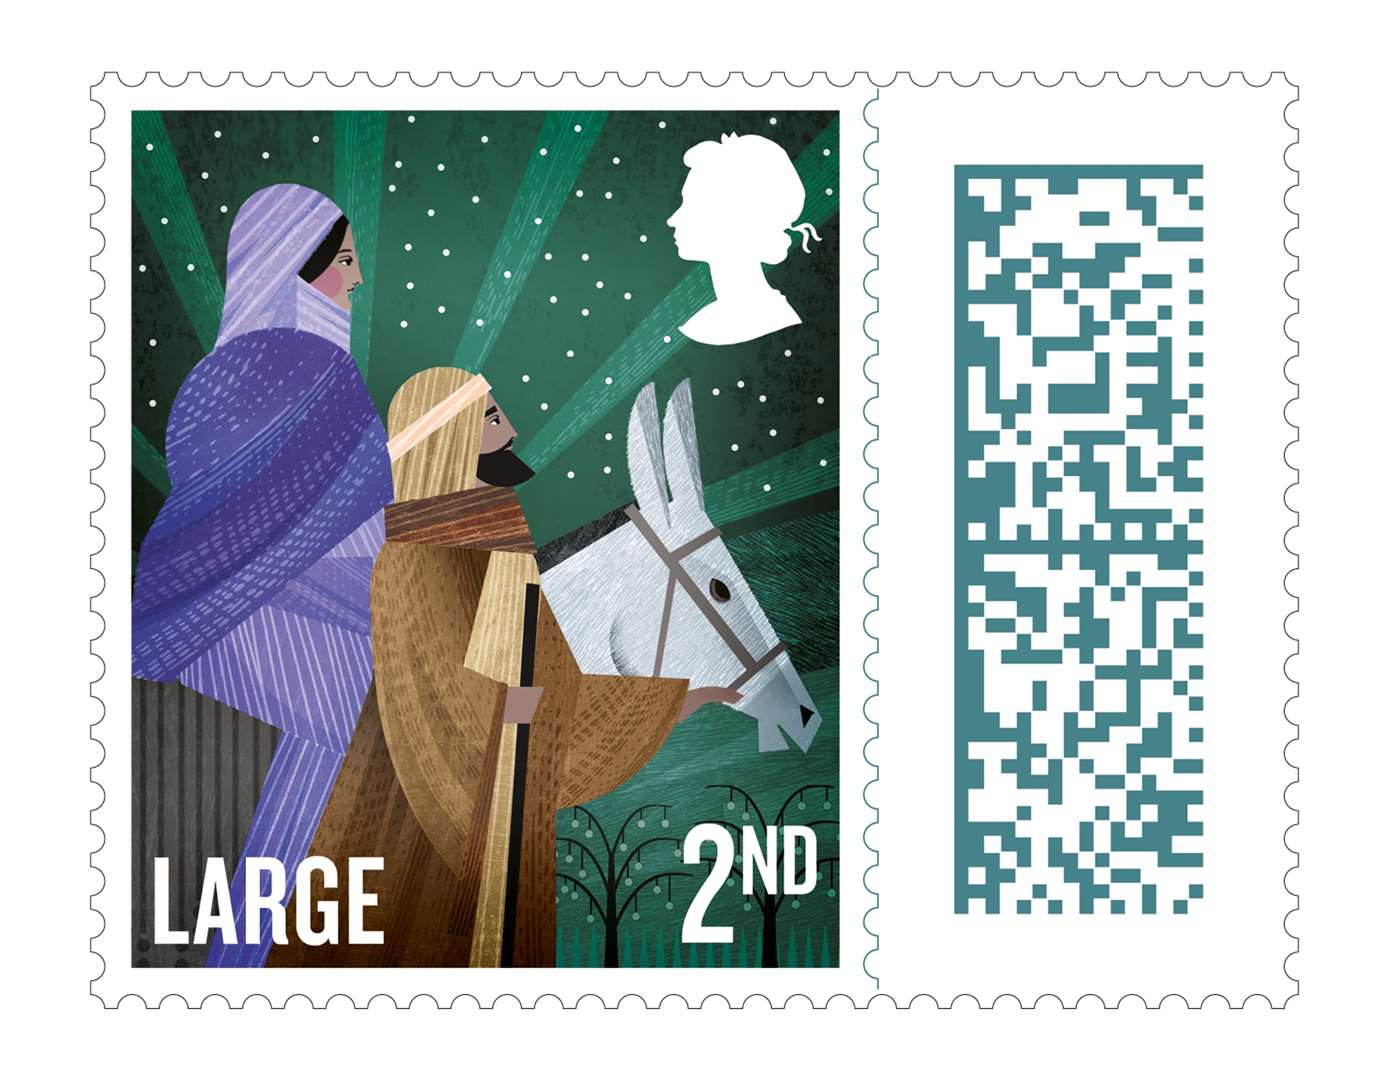 This year's Christmas stamps also include the new barcode feature